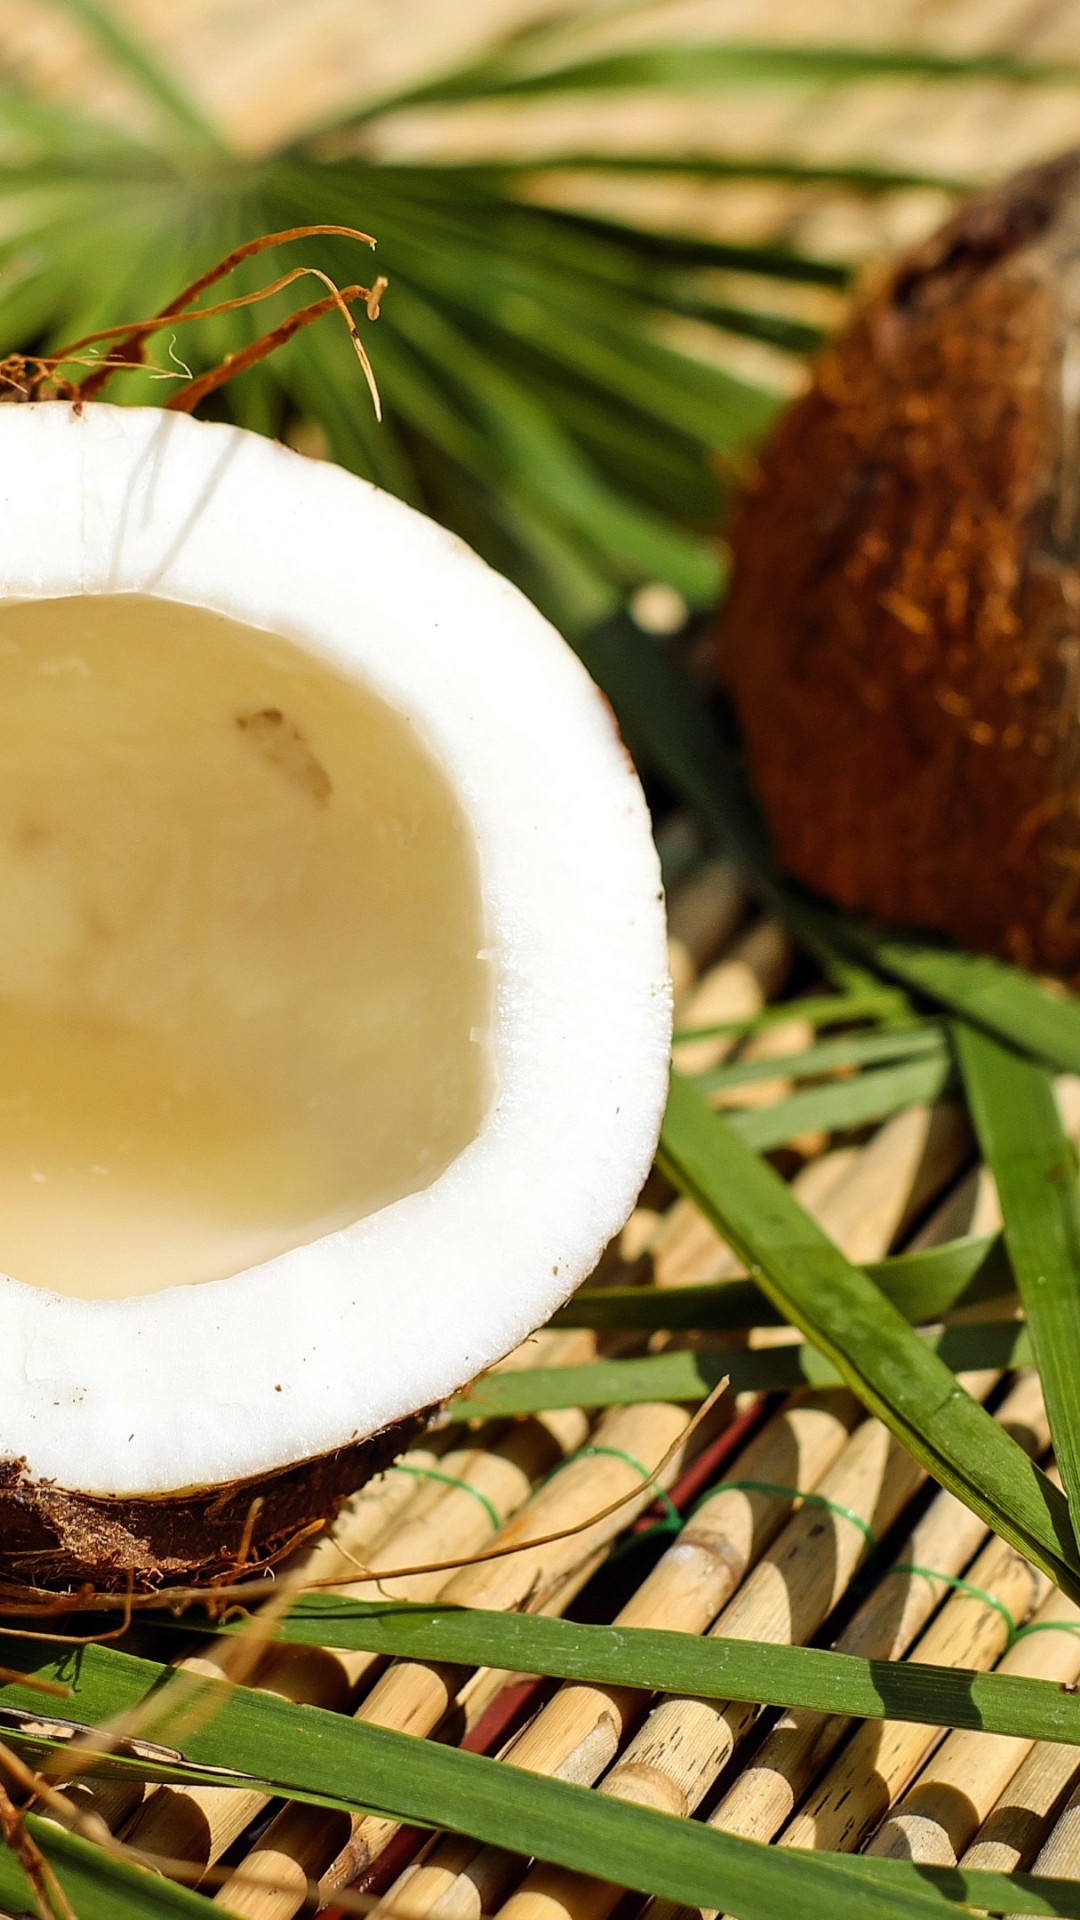 Coconut: Contains numerous antioxidants that fight against factors causing cell damage. 1080x1920 Full HD Wallpaper.